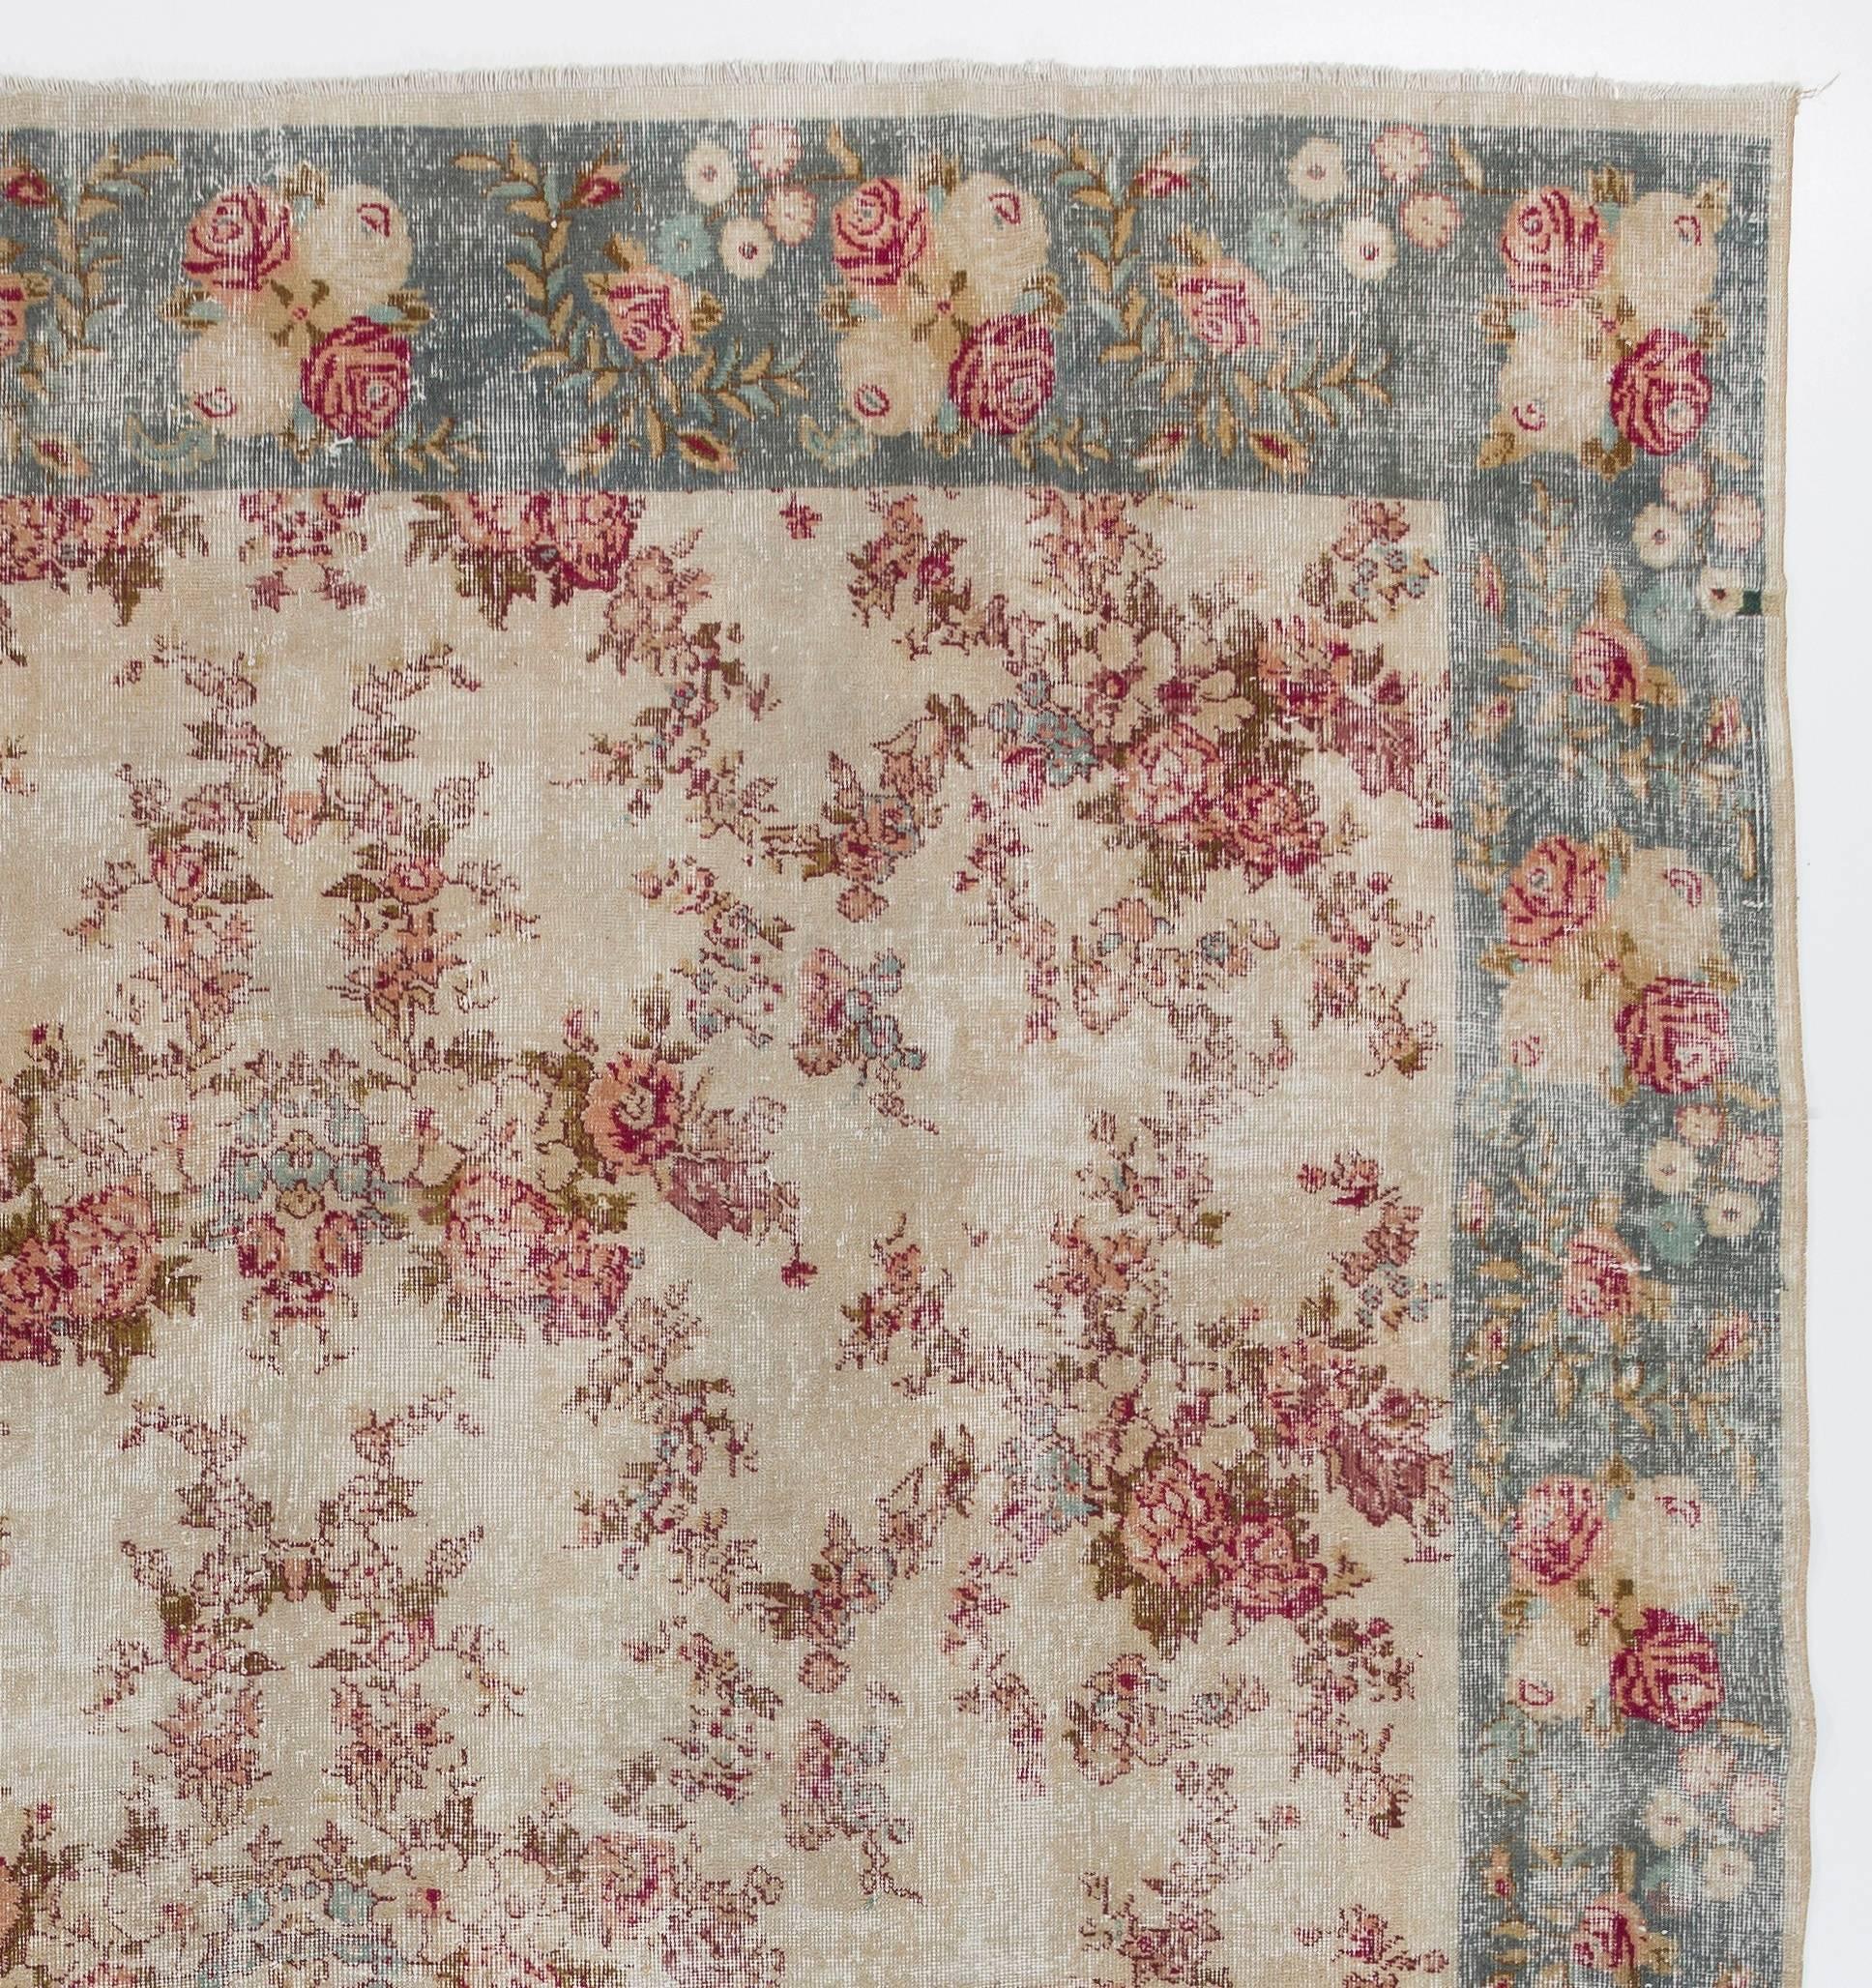 A finely hand-knotted vintage Turkish rug from the 1970s with an overall rose garden design, rendered in soft outlines in romantic reds and pinks reminiscent of the fabrics and flowers of french country and rustic farmhouse styles. The softness of